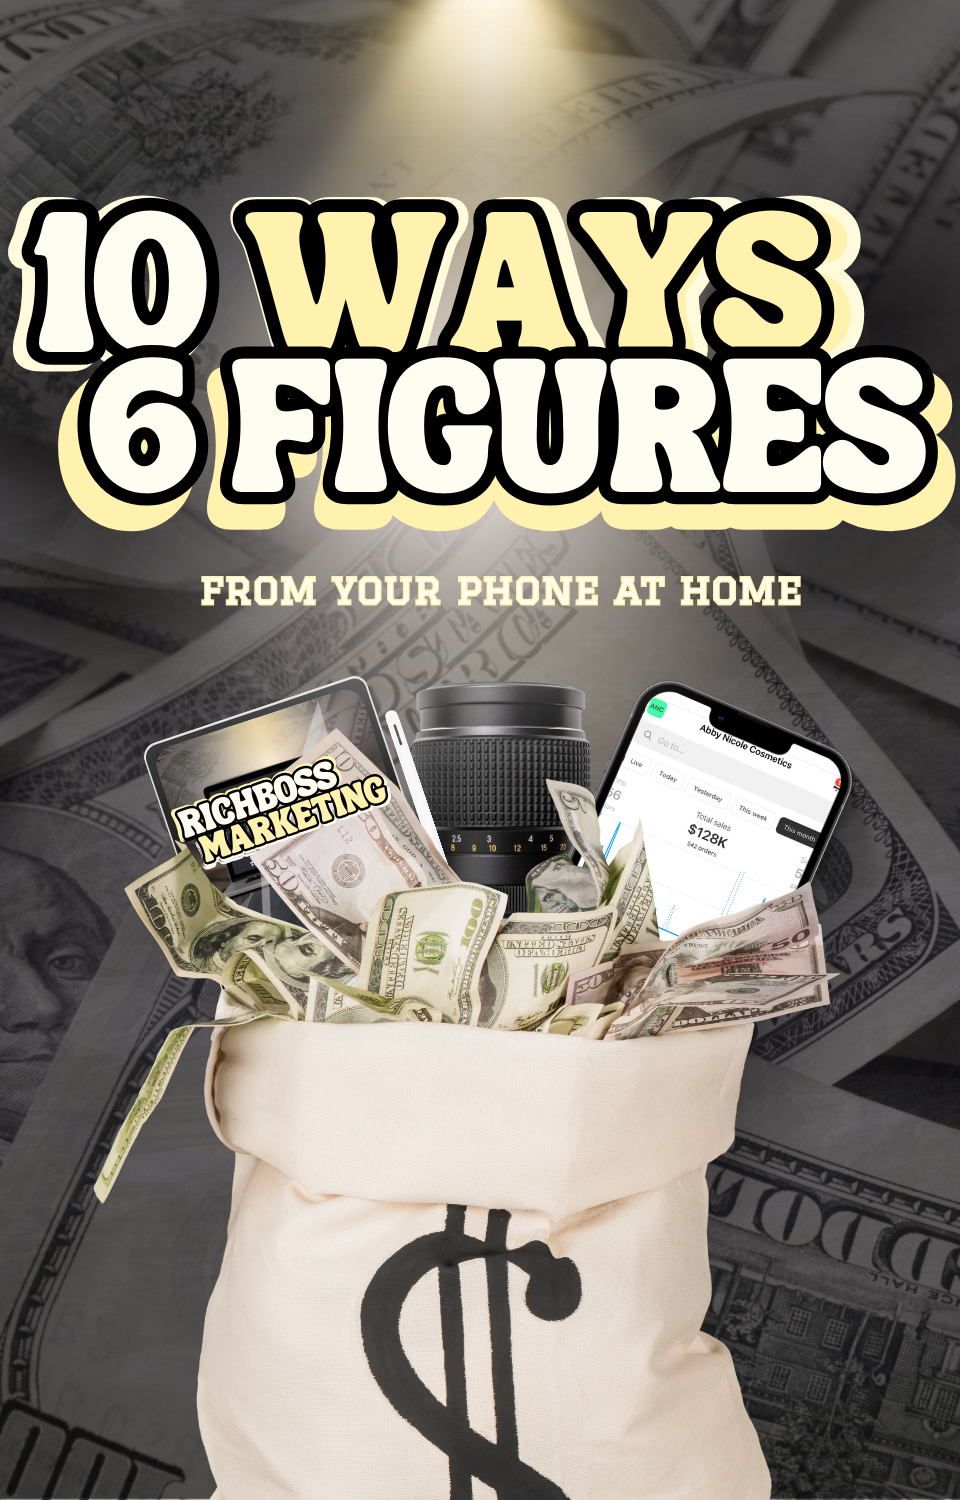 10 WAYS 6 FIGURES FROM YOUR PHONE AT HOME DONE FOR YOU / RESELL COURSE  BY : ABBY NICOLE